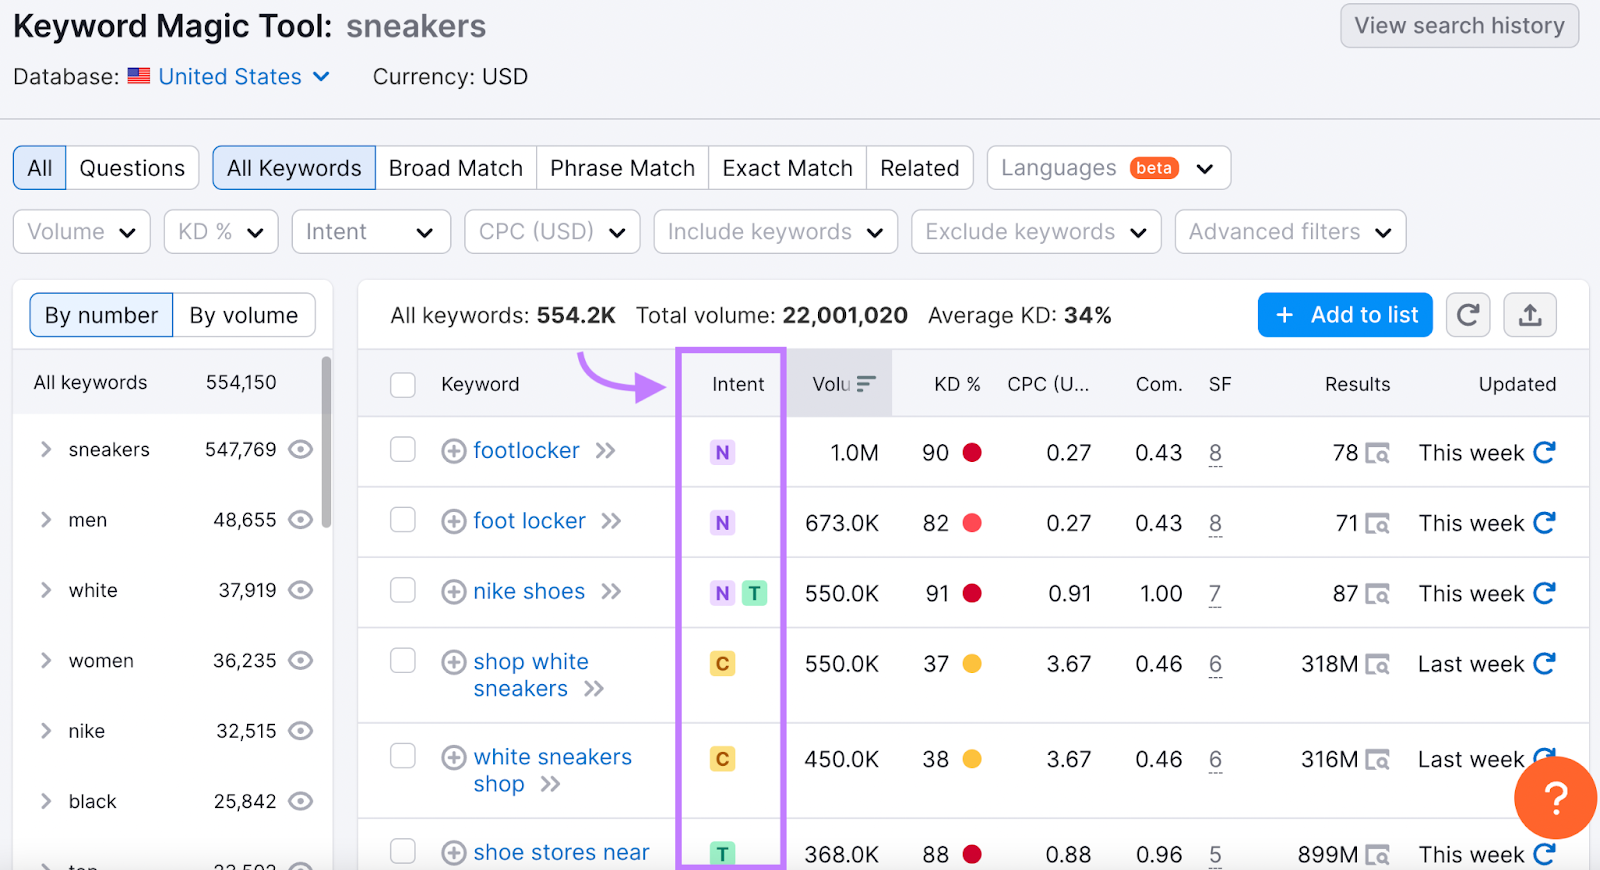 Keyword Magic Tool results for "sneakers" with intent file  highlighted